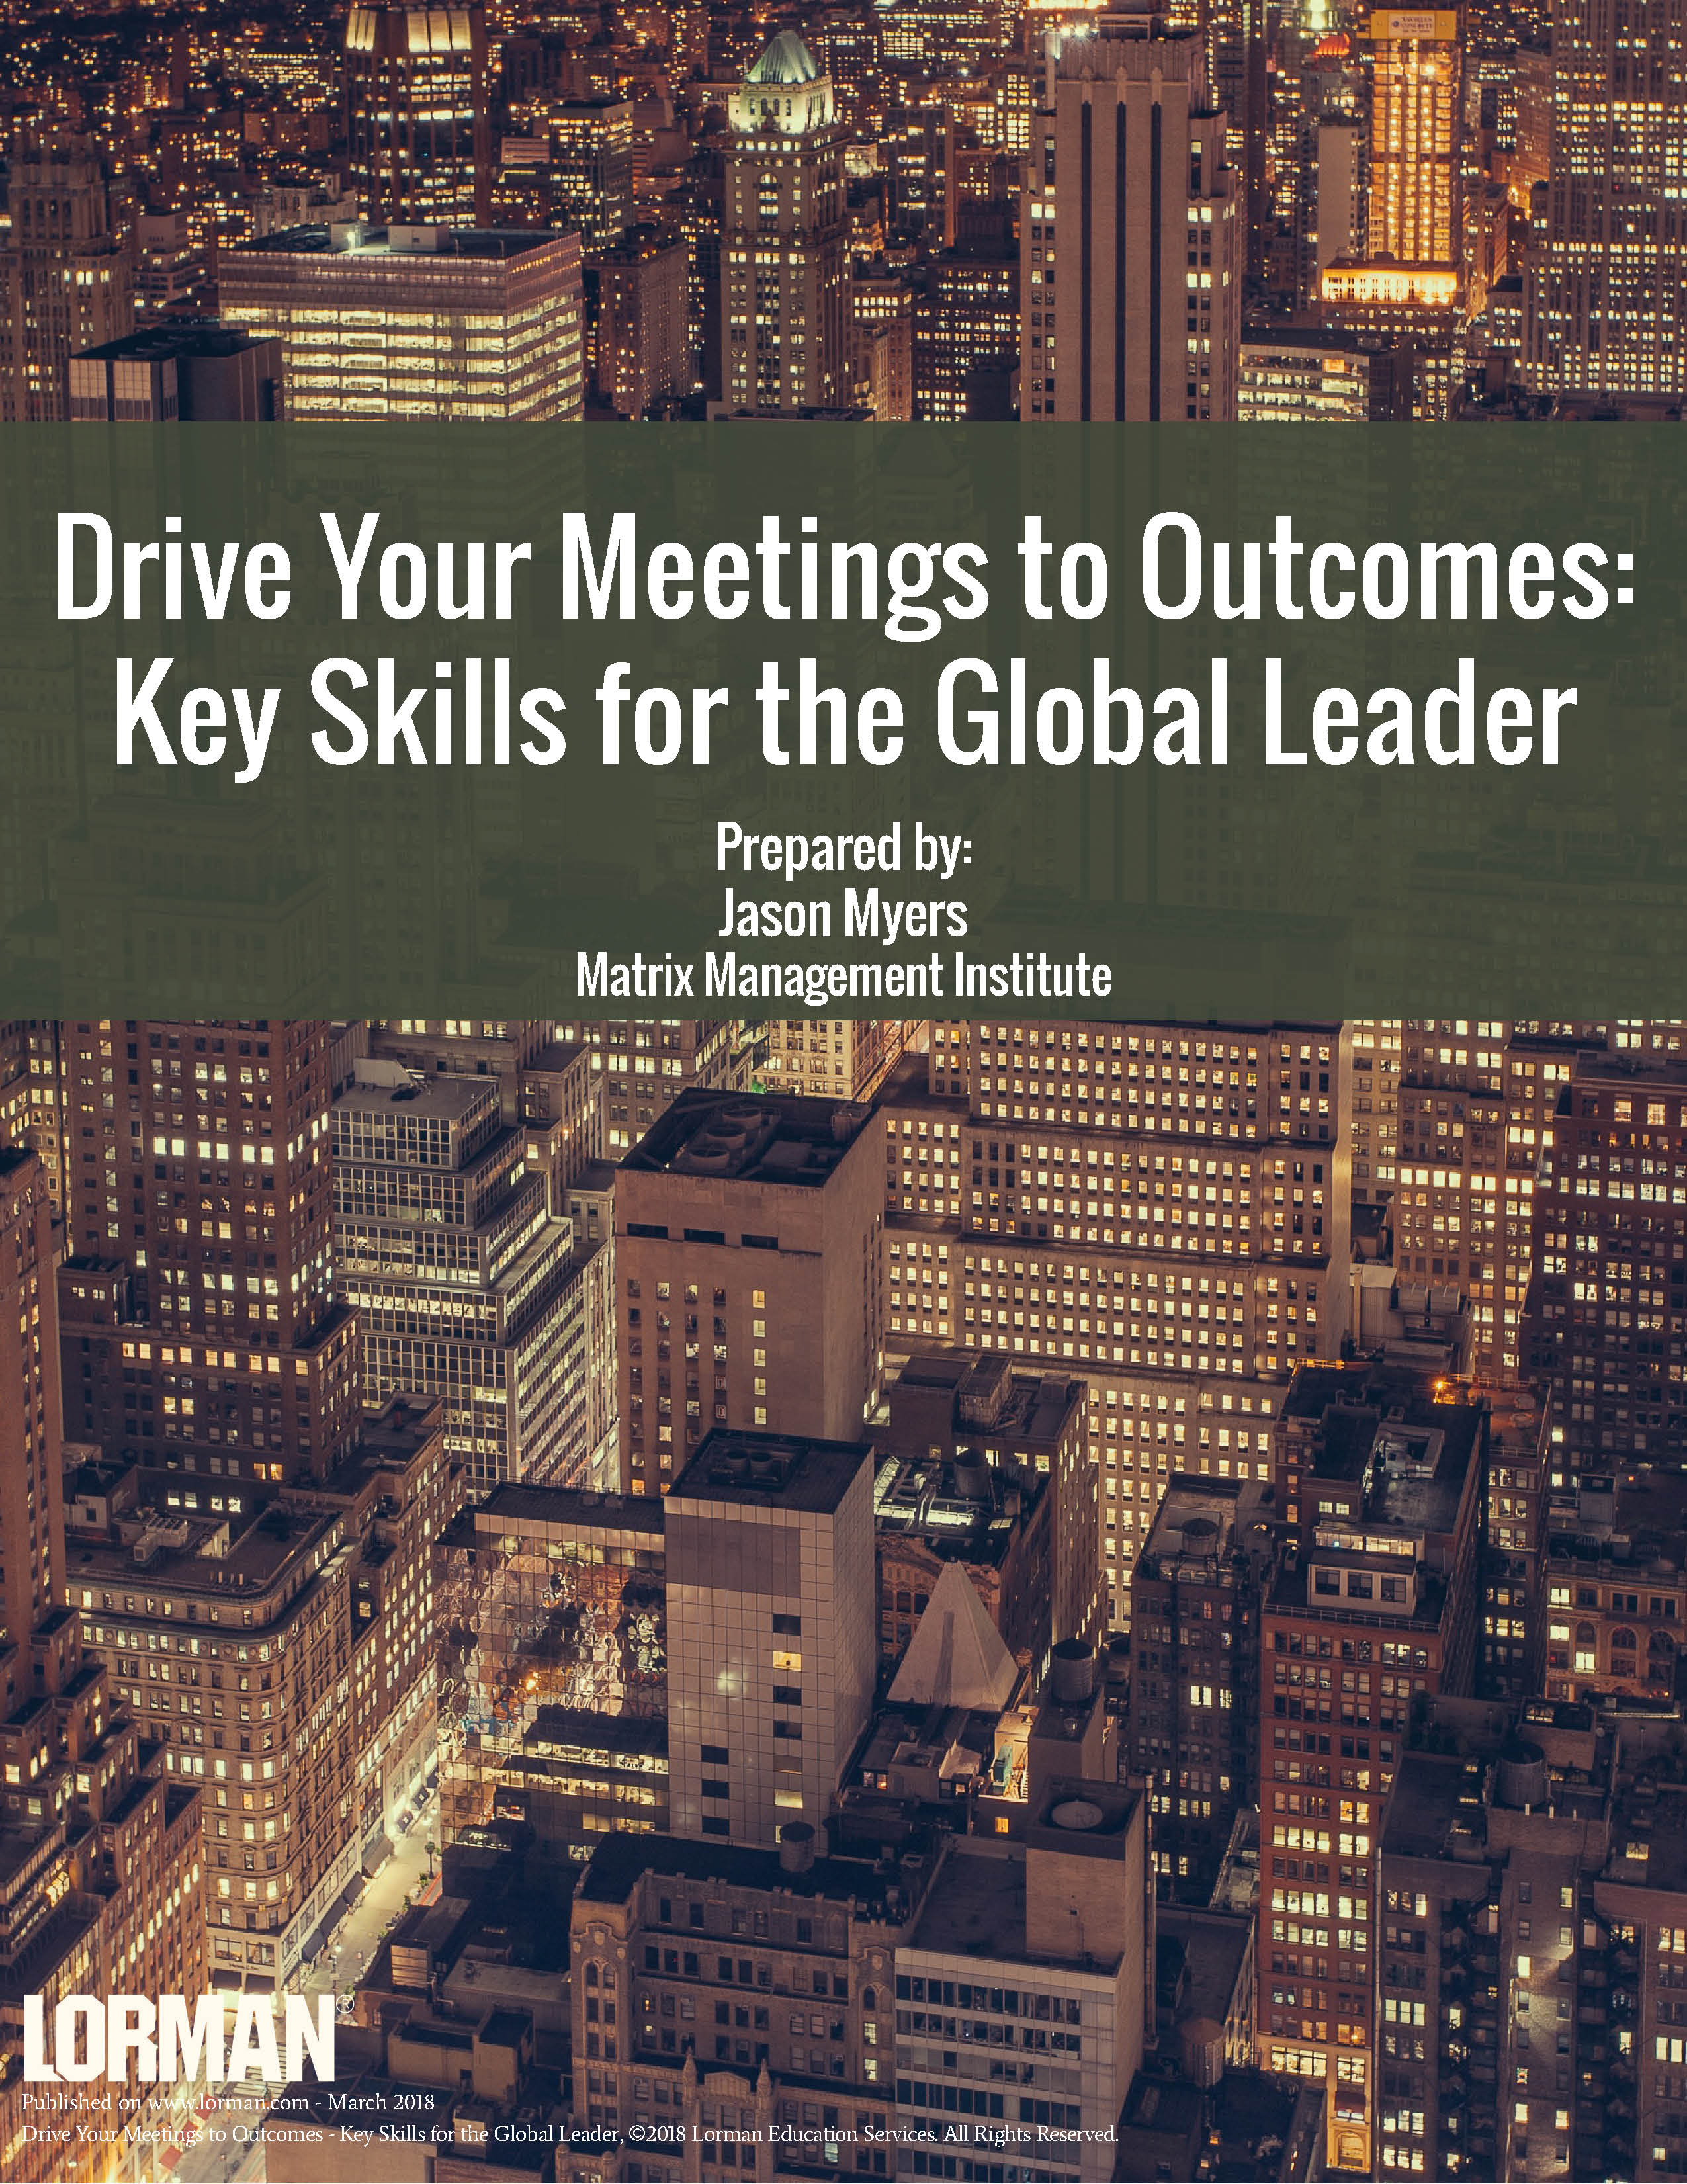 Drive Your Meetings to Outcomes: Key Skills for the Global Leader